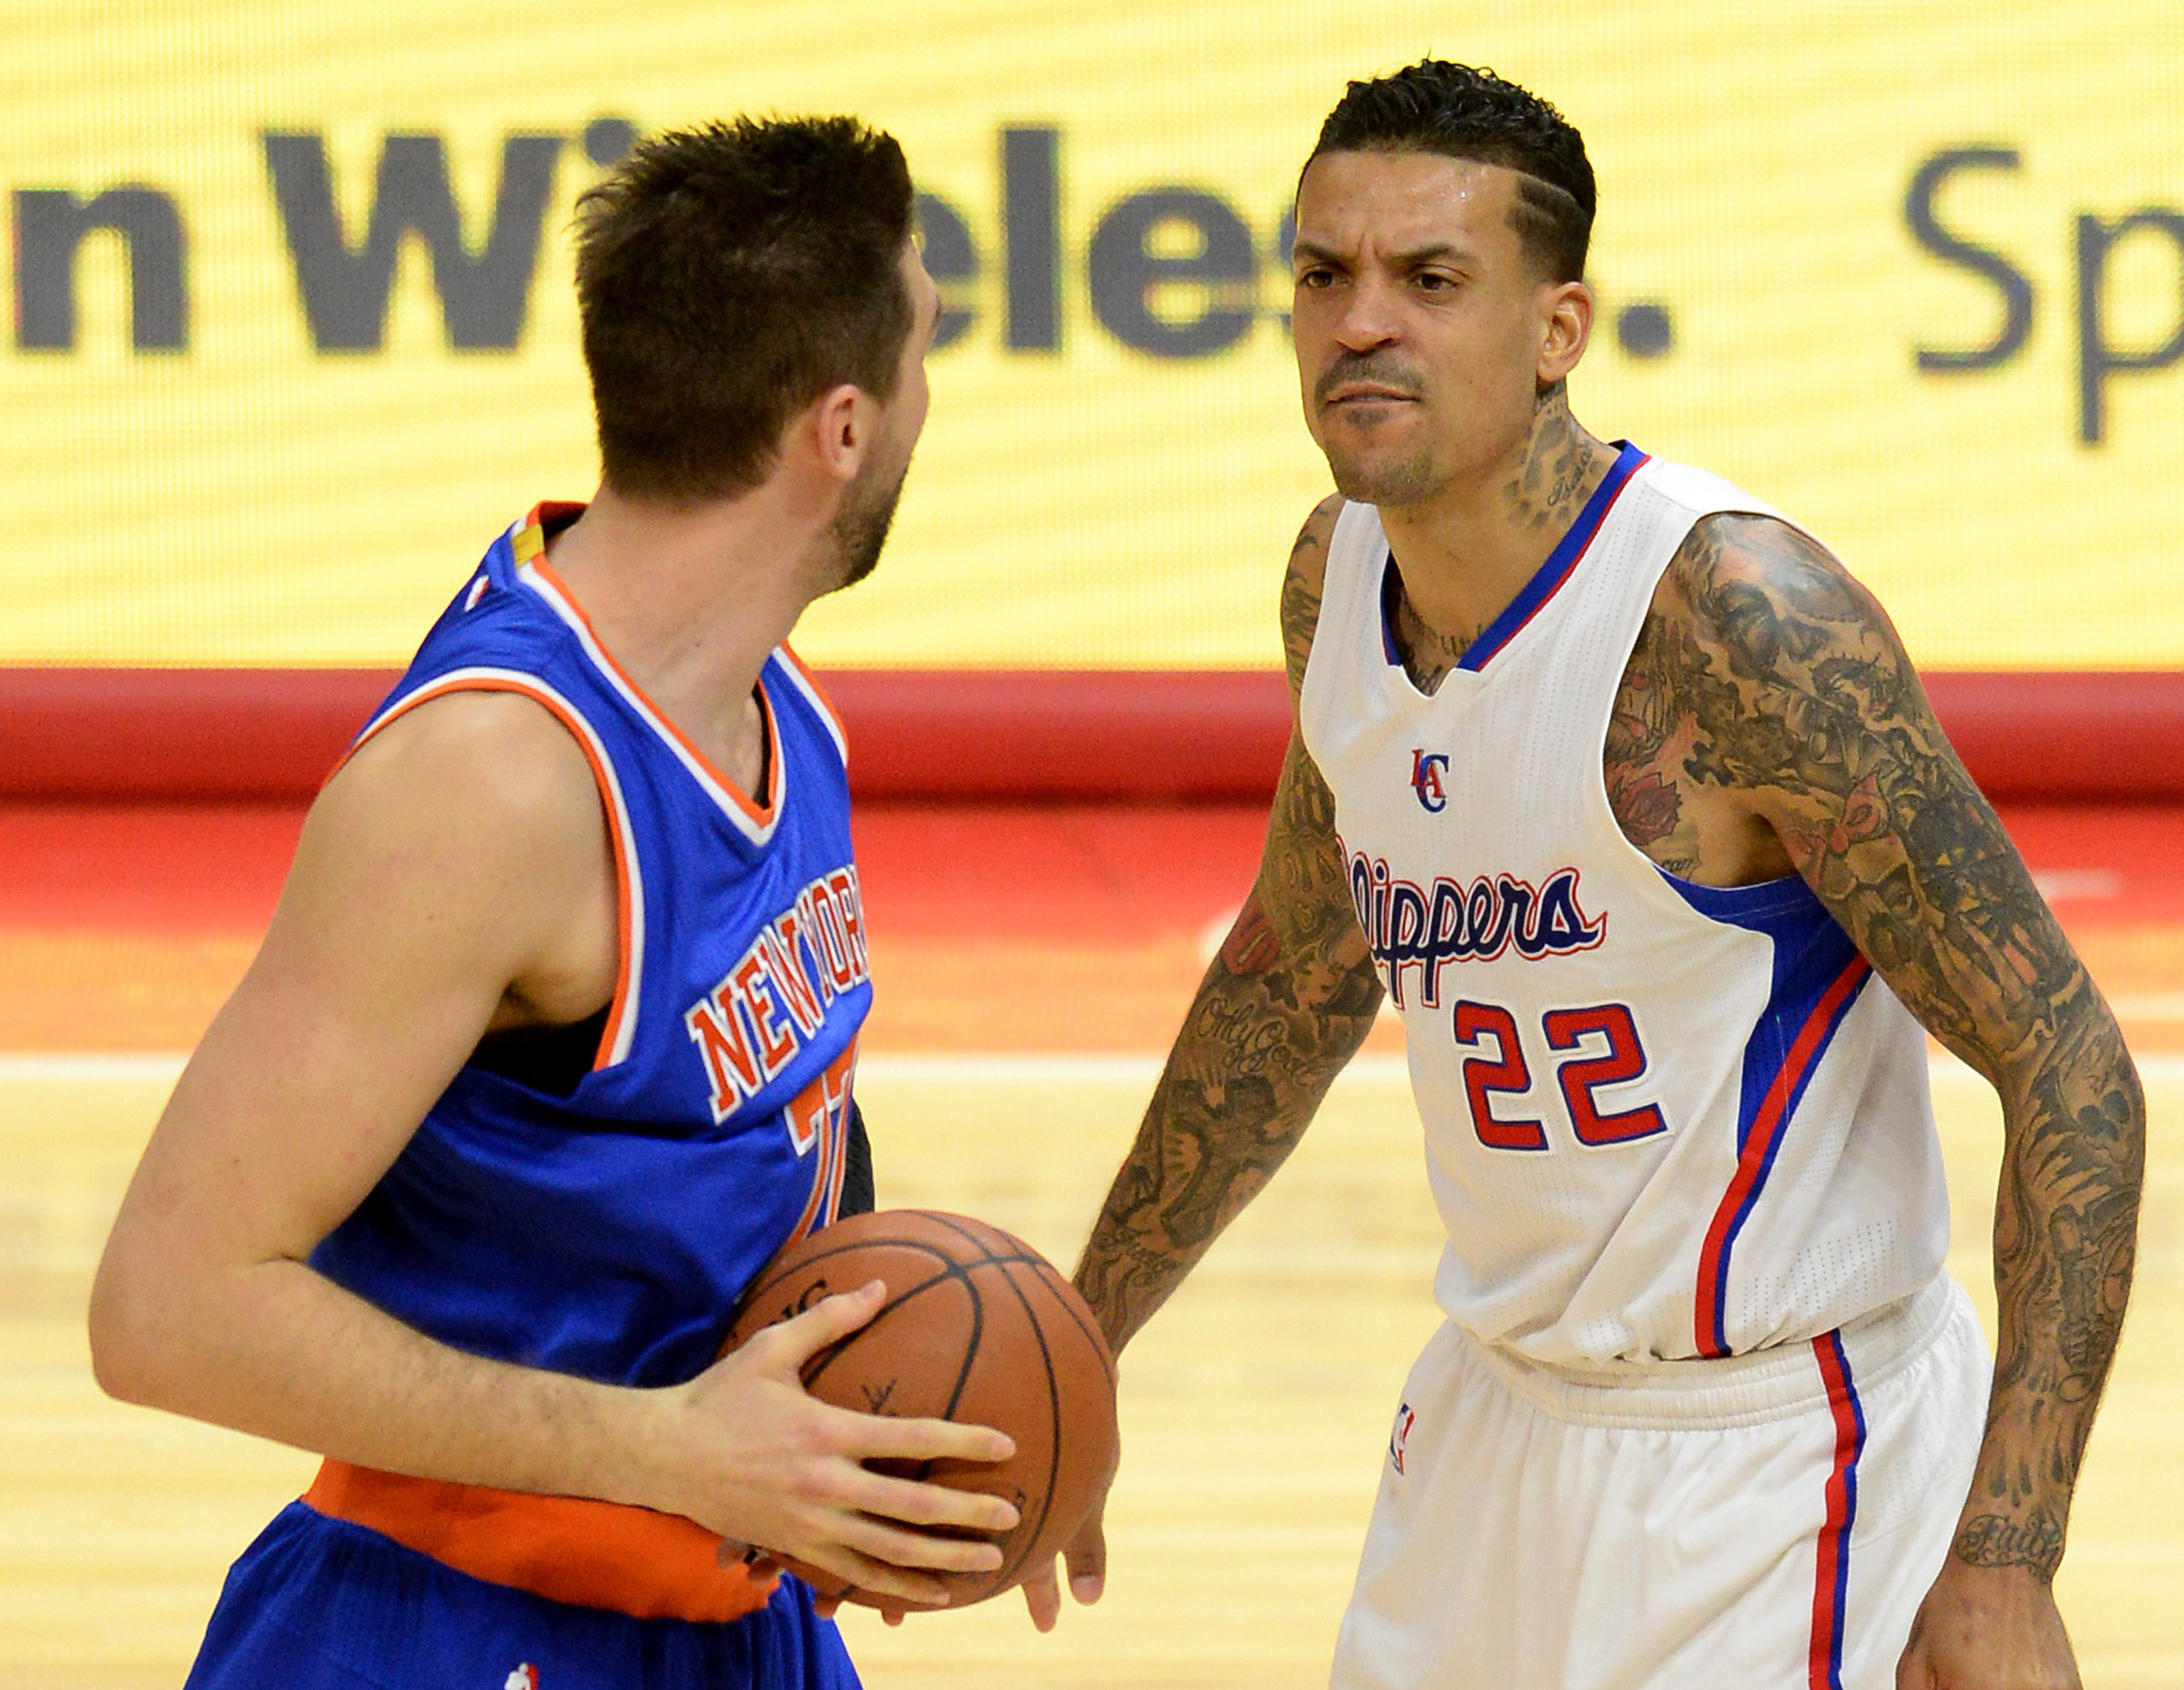 In a recent interview, Kings forward Matt Barnes opened up about beating do...